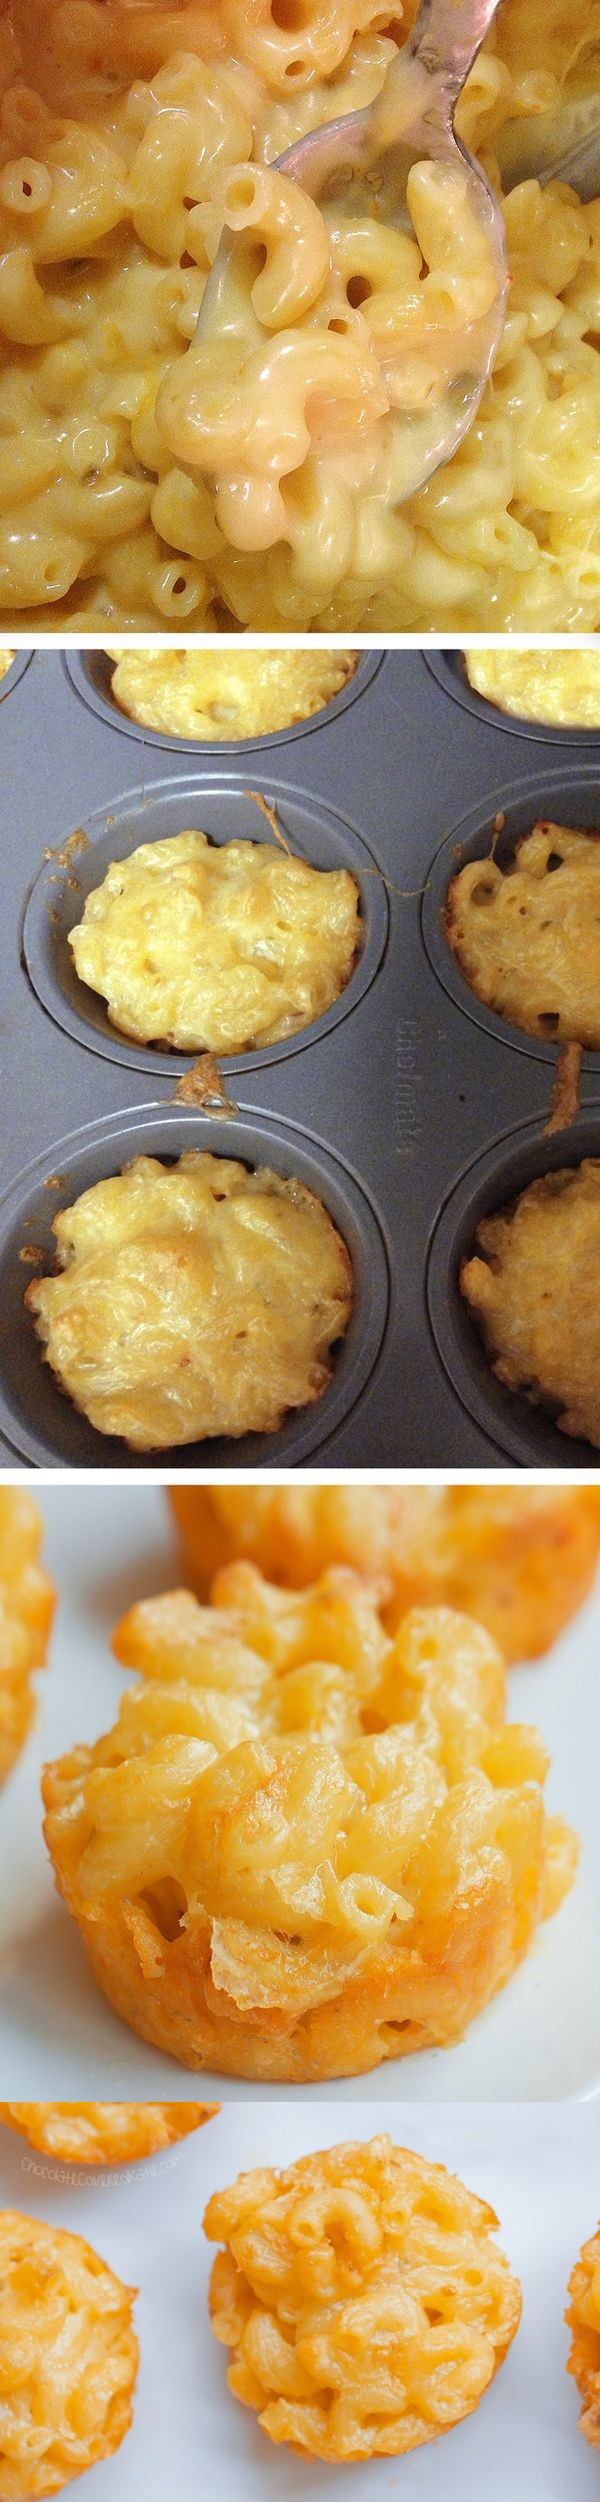 Baked Mac & Cheese Cups To Go